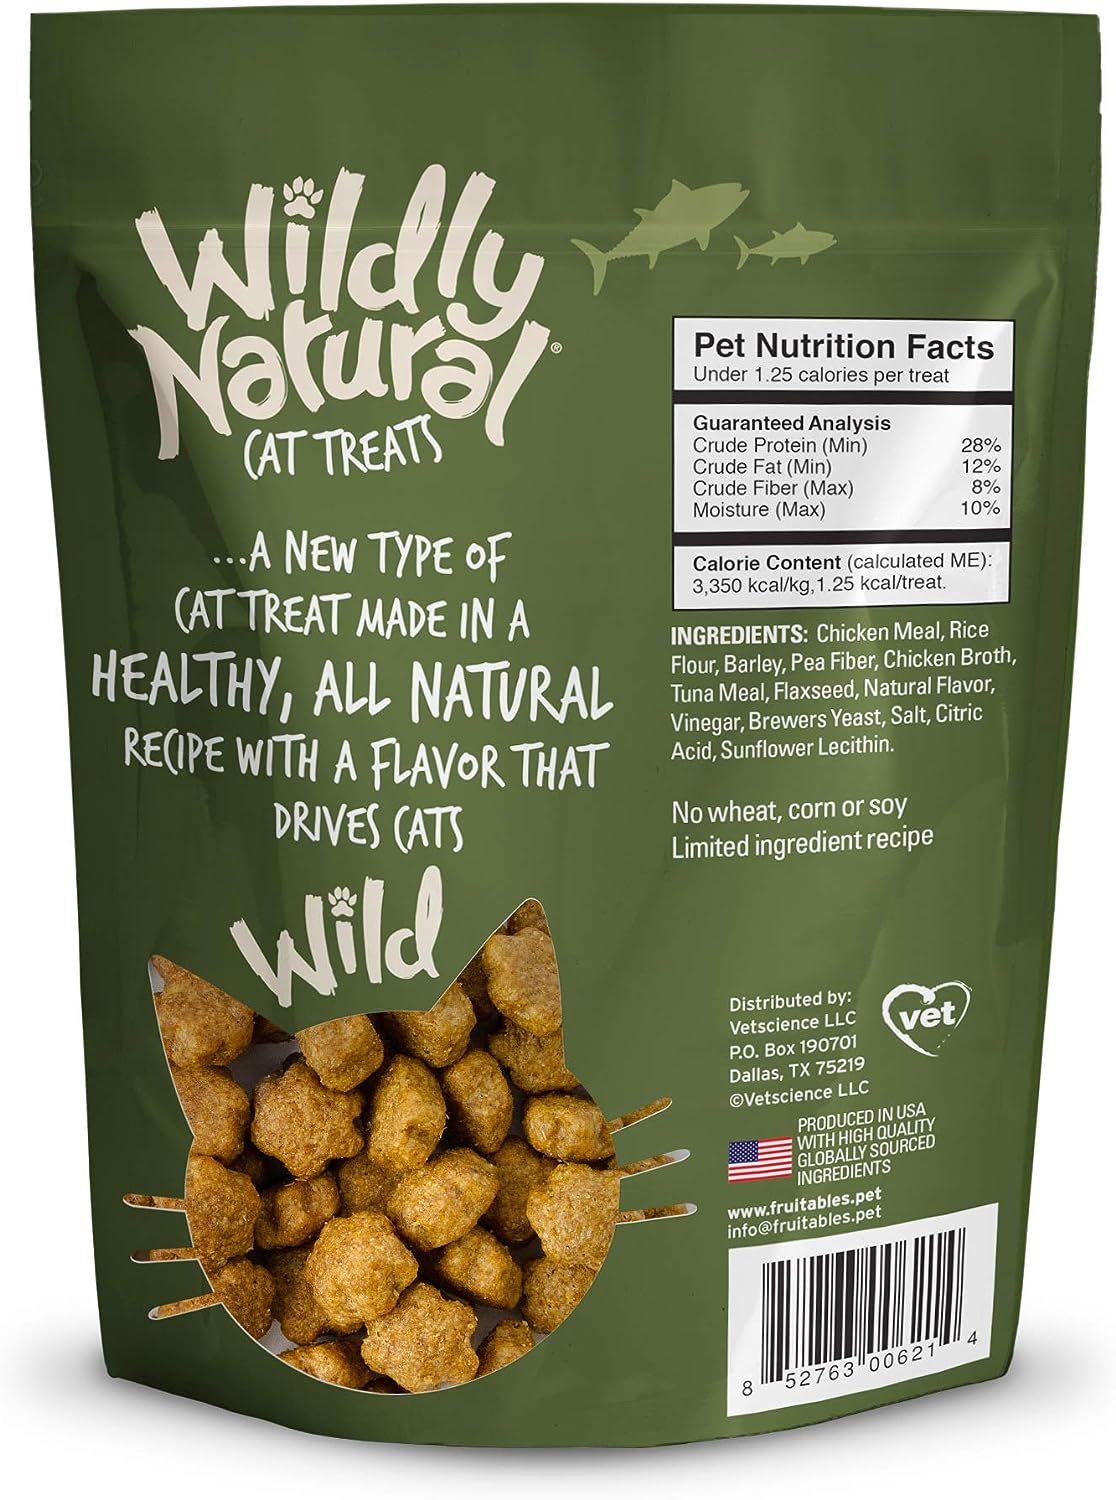 Fruitables wildly Natural Cat Treats Salmon flavor (71g)